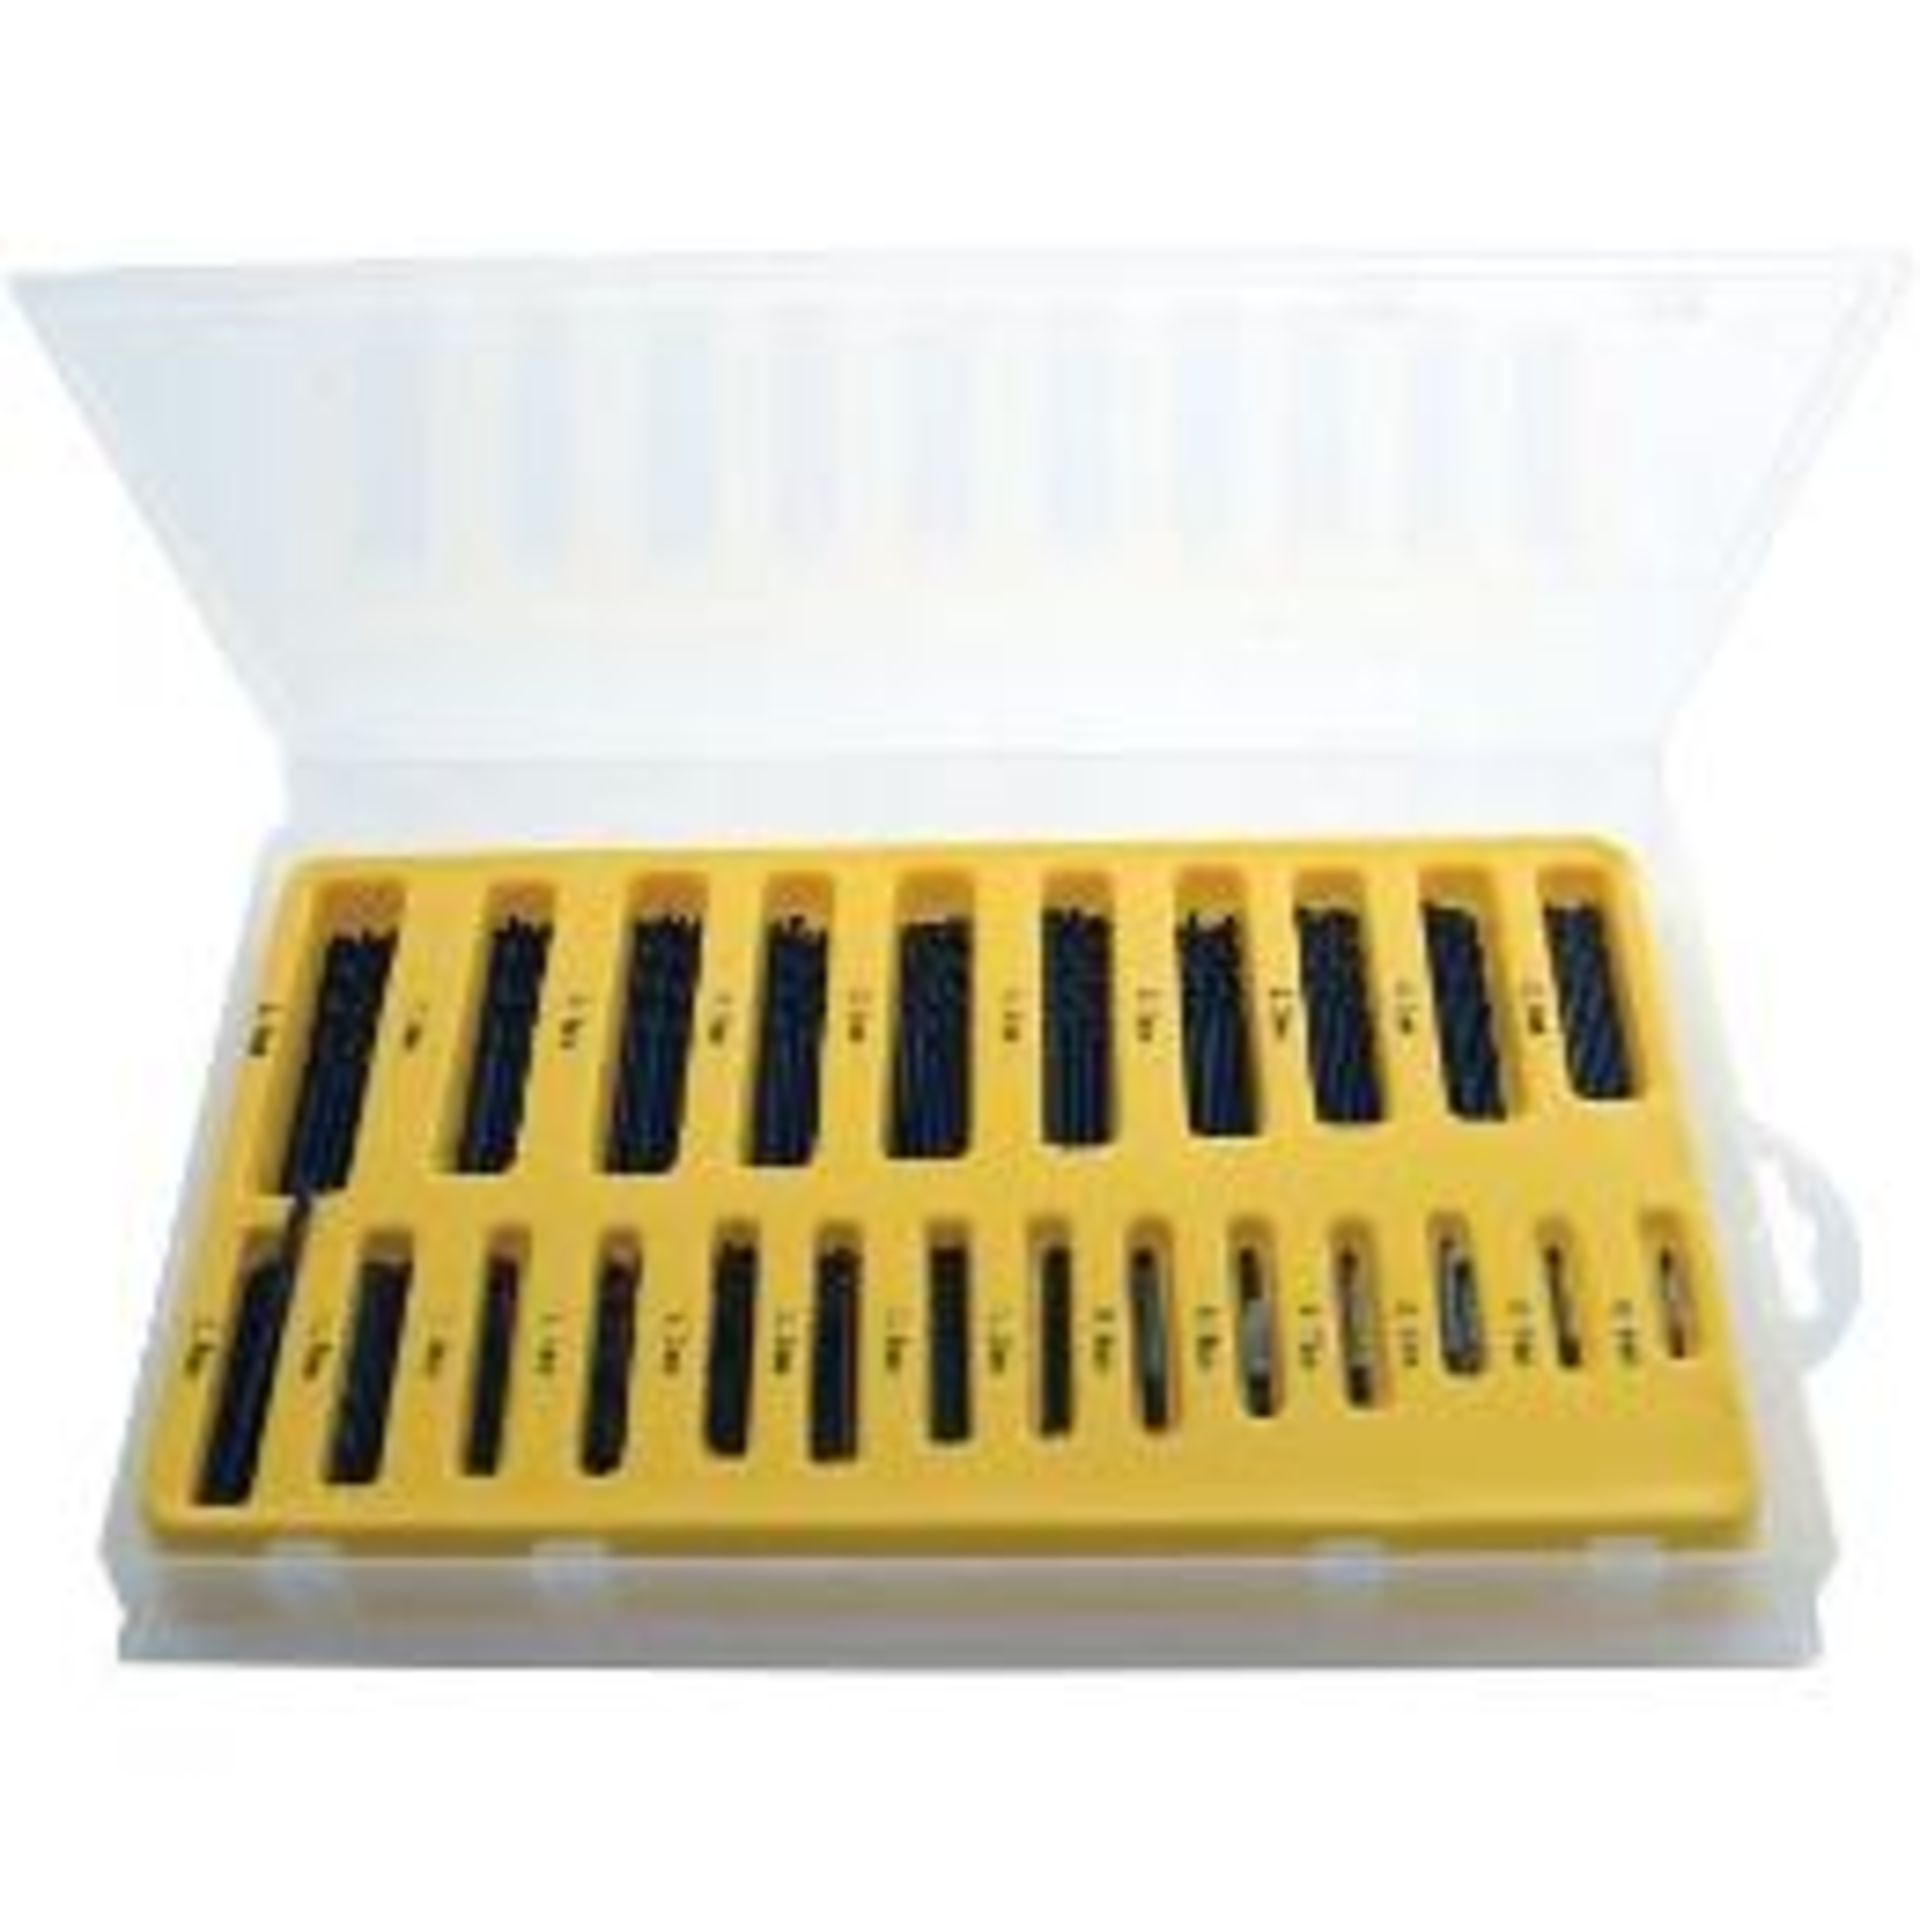 + VAT Brand New 150 Piece Assorted Drill Bit Set - Sizes Ranging From 0.4mm to 3.2mm